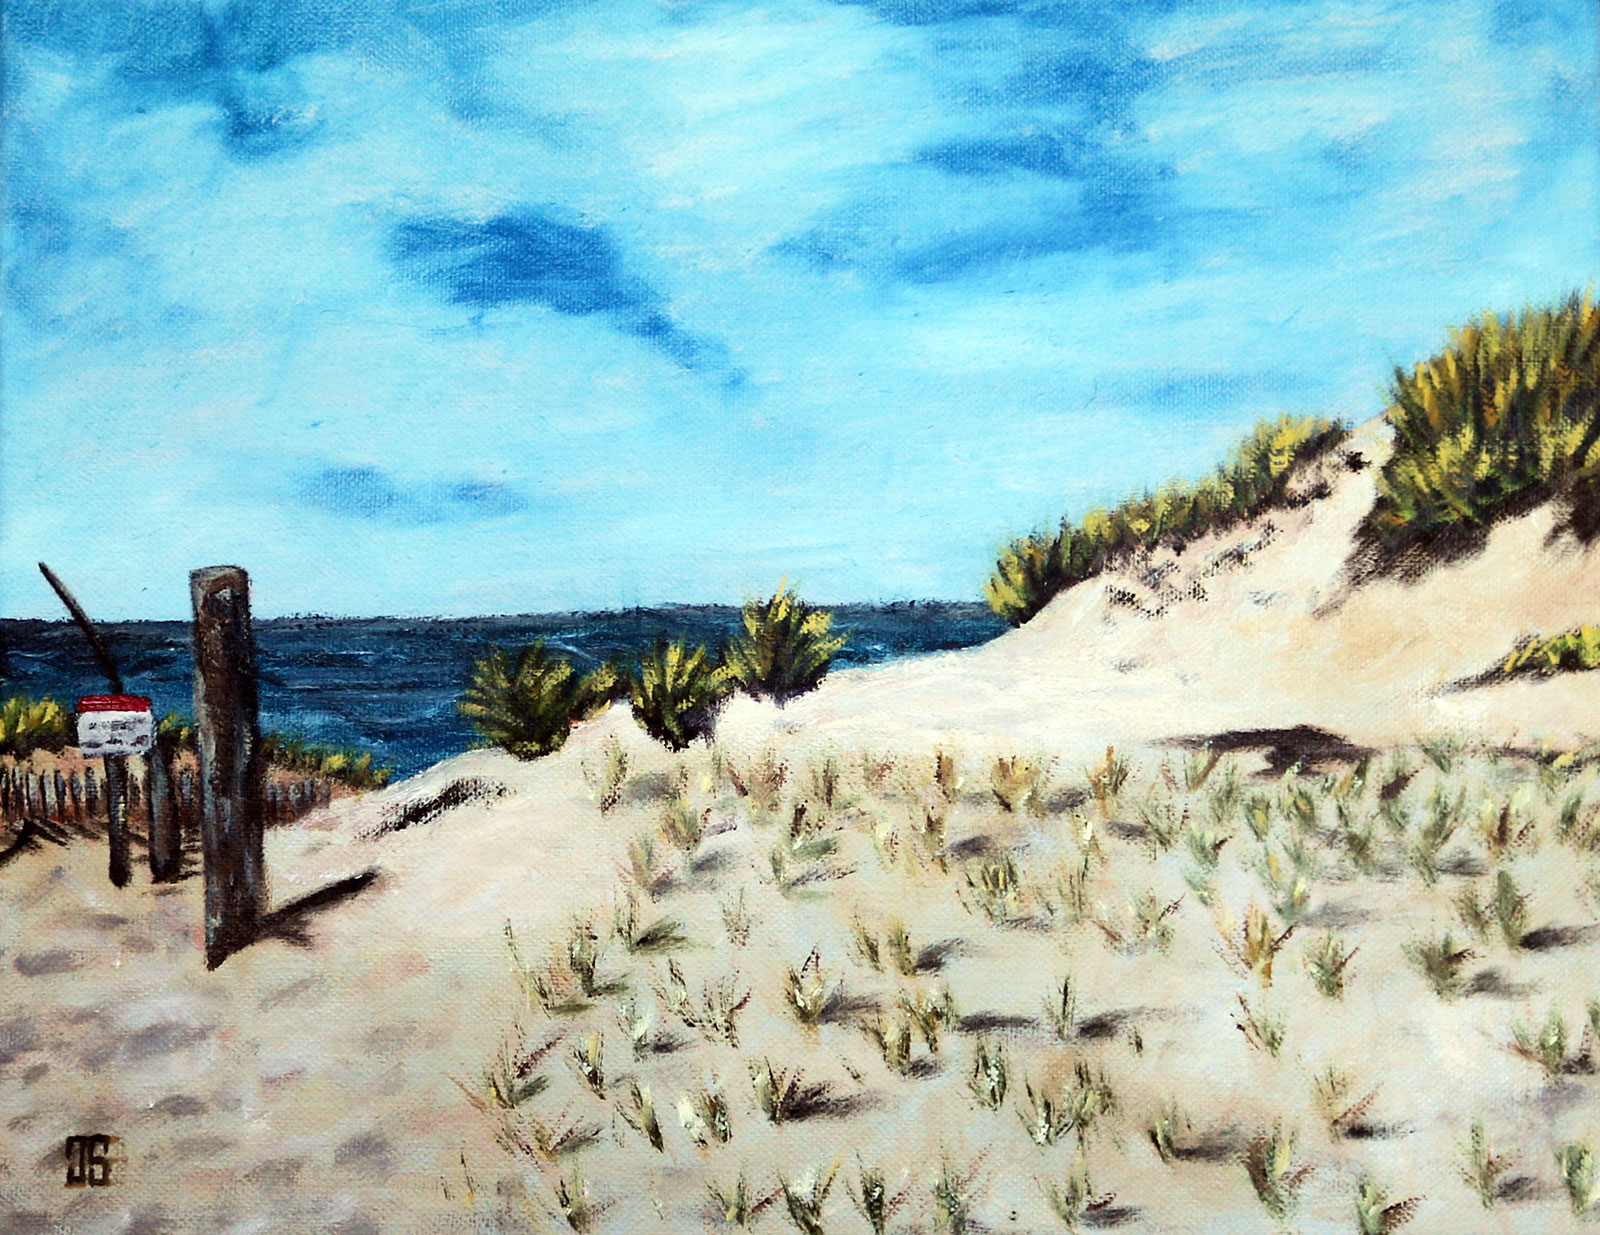 Oil painting "Race Point Beach" by Jeffrey Dale Starr